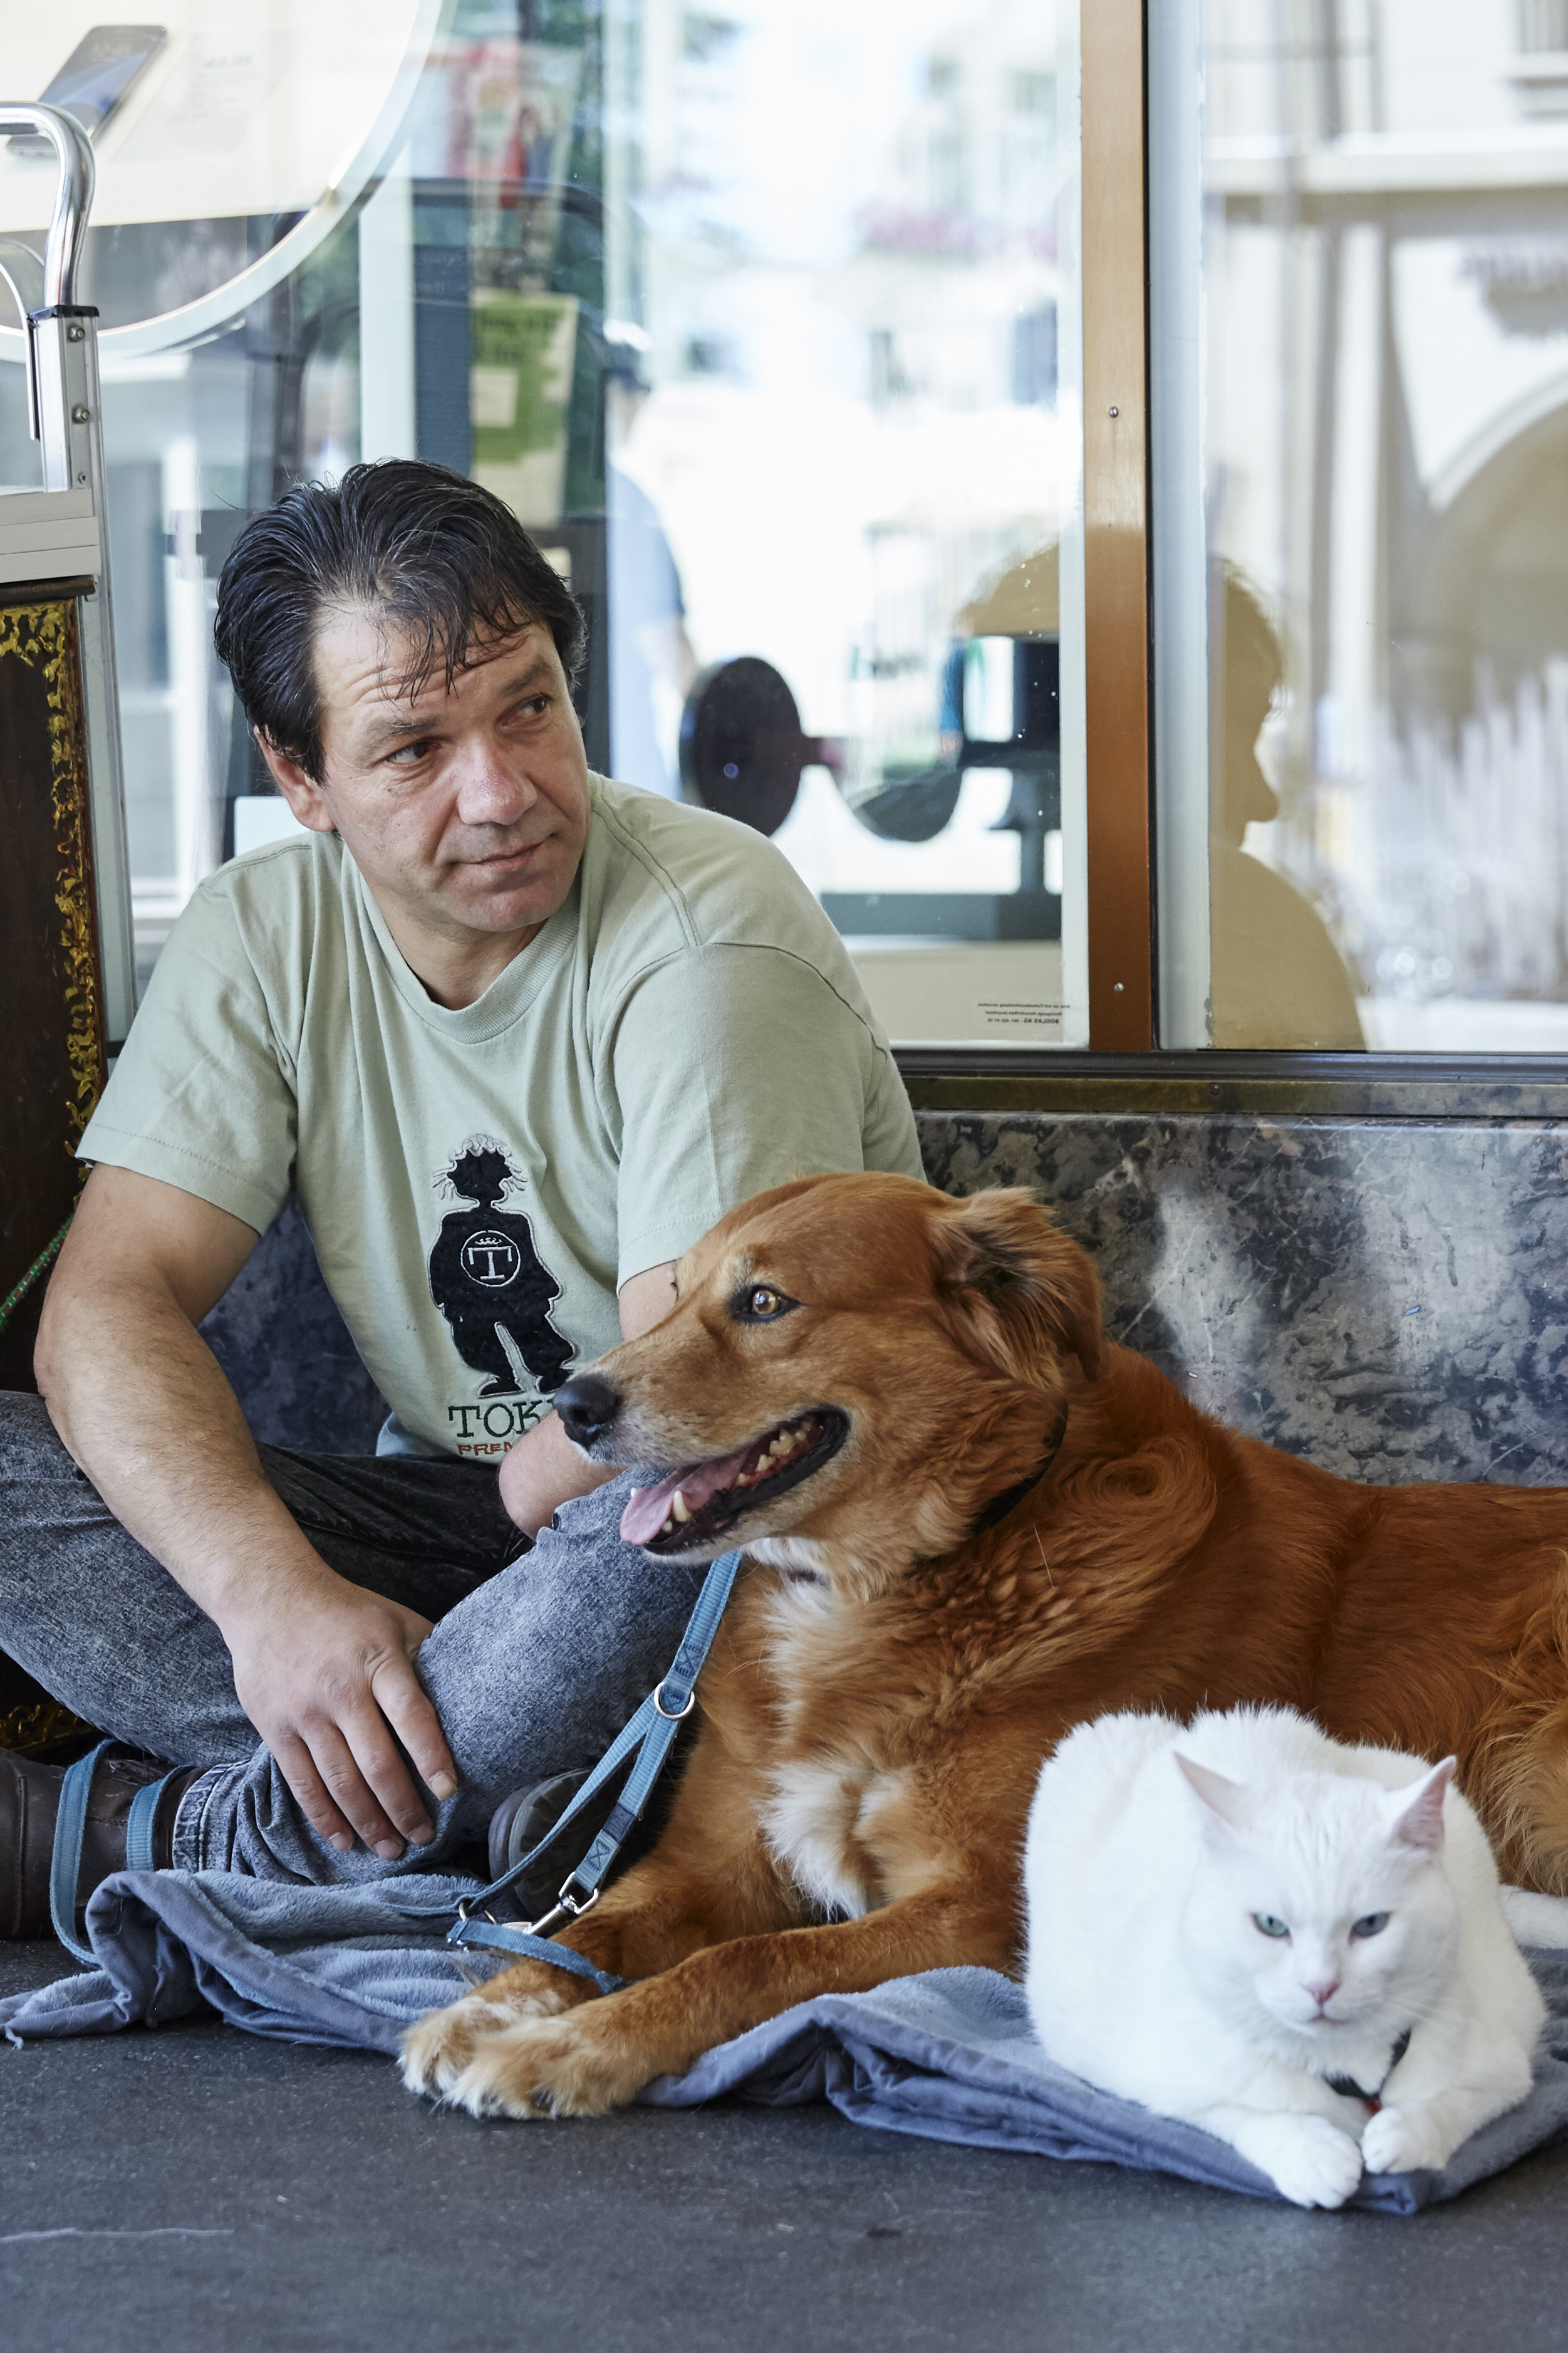 From Bulgaria to Switzerland: A Street Odyssey with a Dog and a Cat